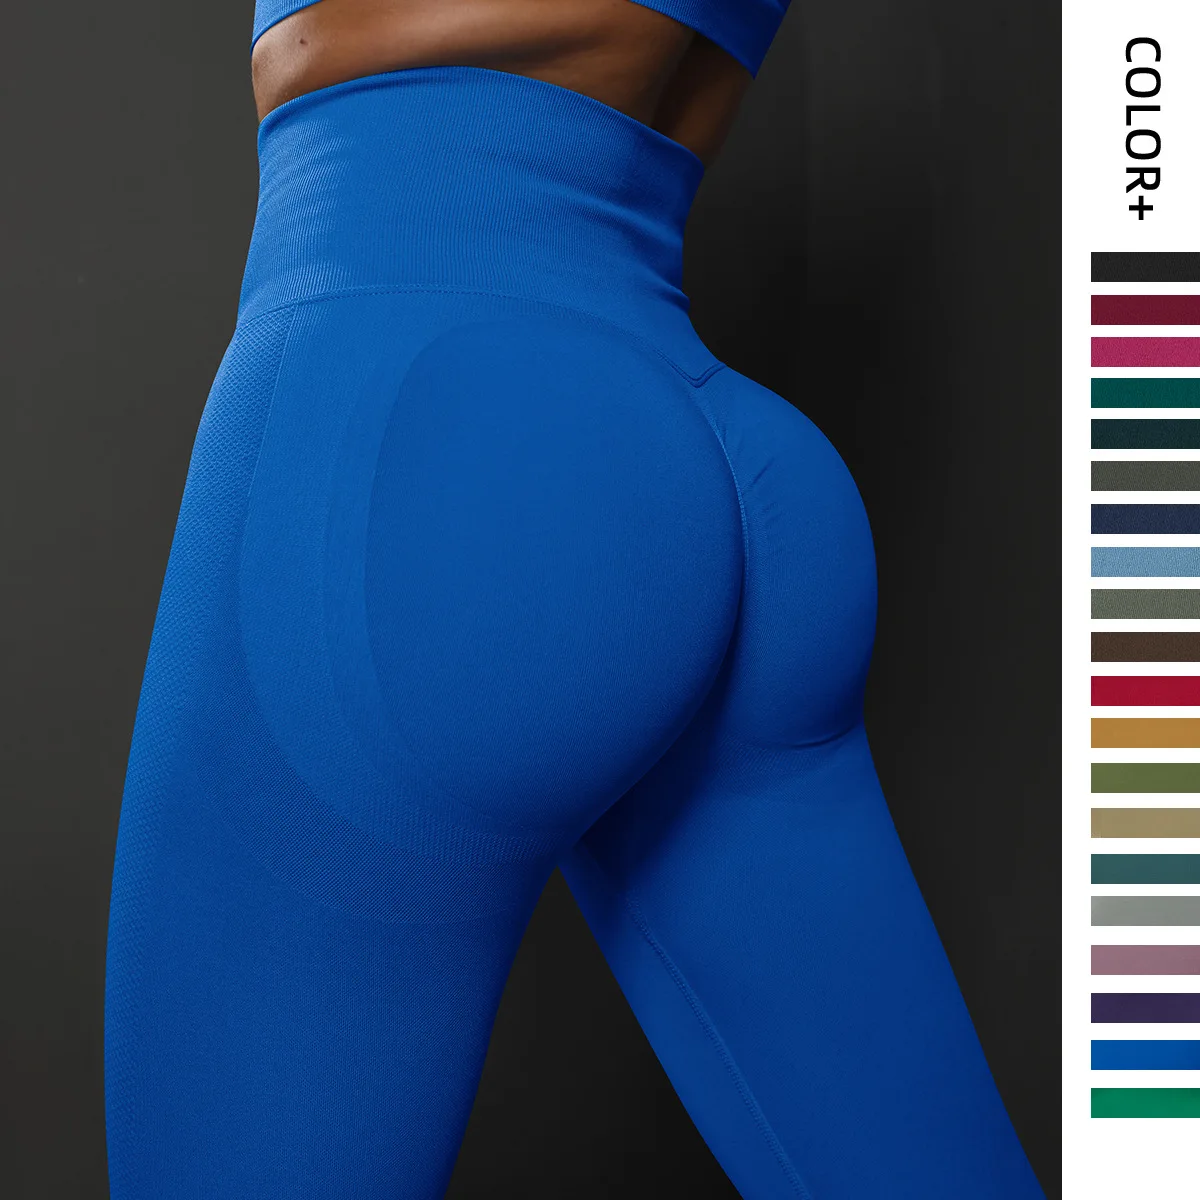 20 colors many colors Seamless Smiling Face High Waist Tight Yoga legging Honey Peach Hip Training Yoga Pants Sports Running Fit